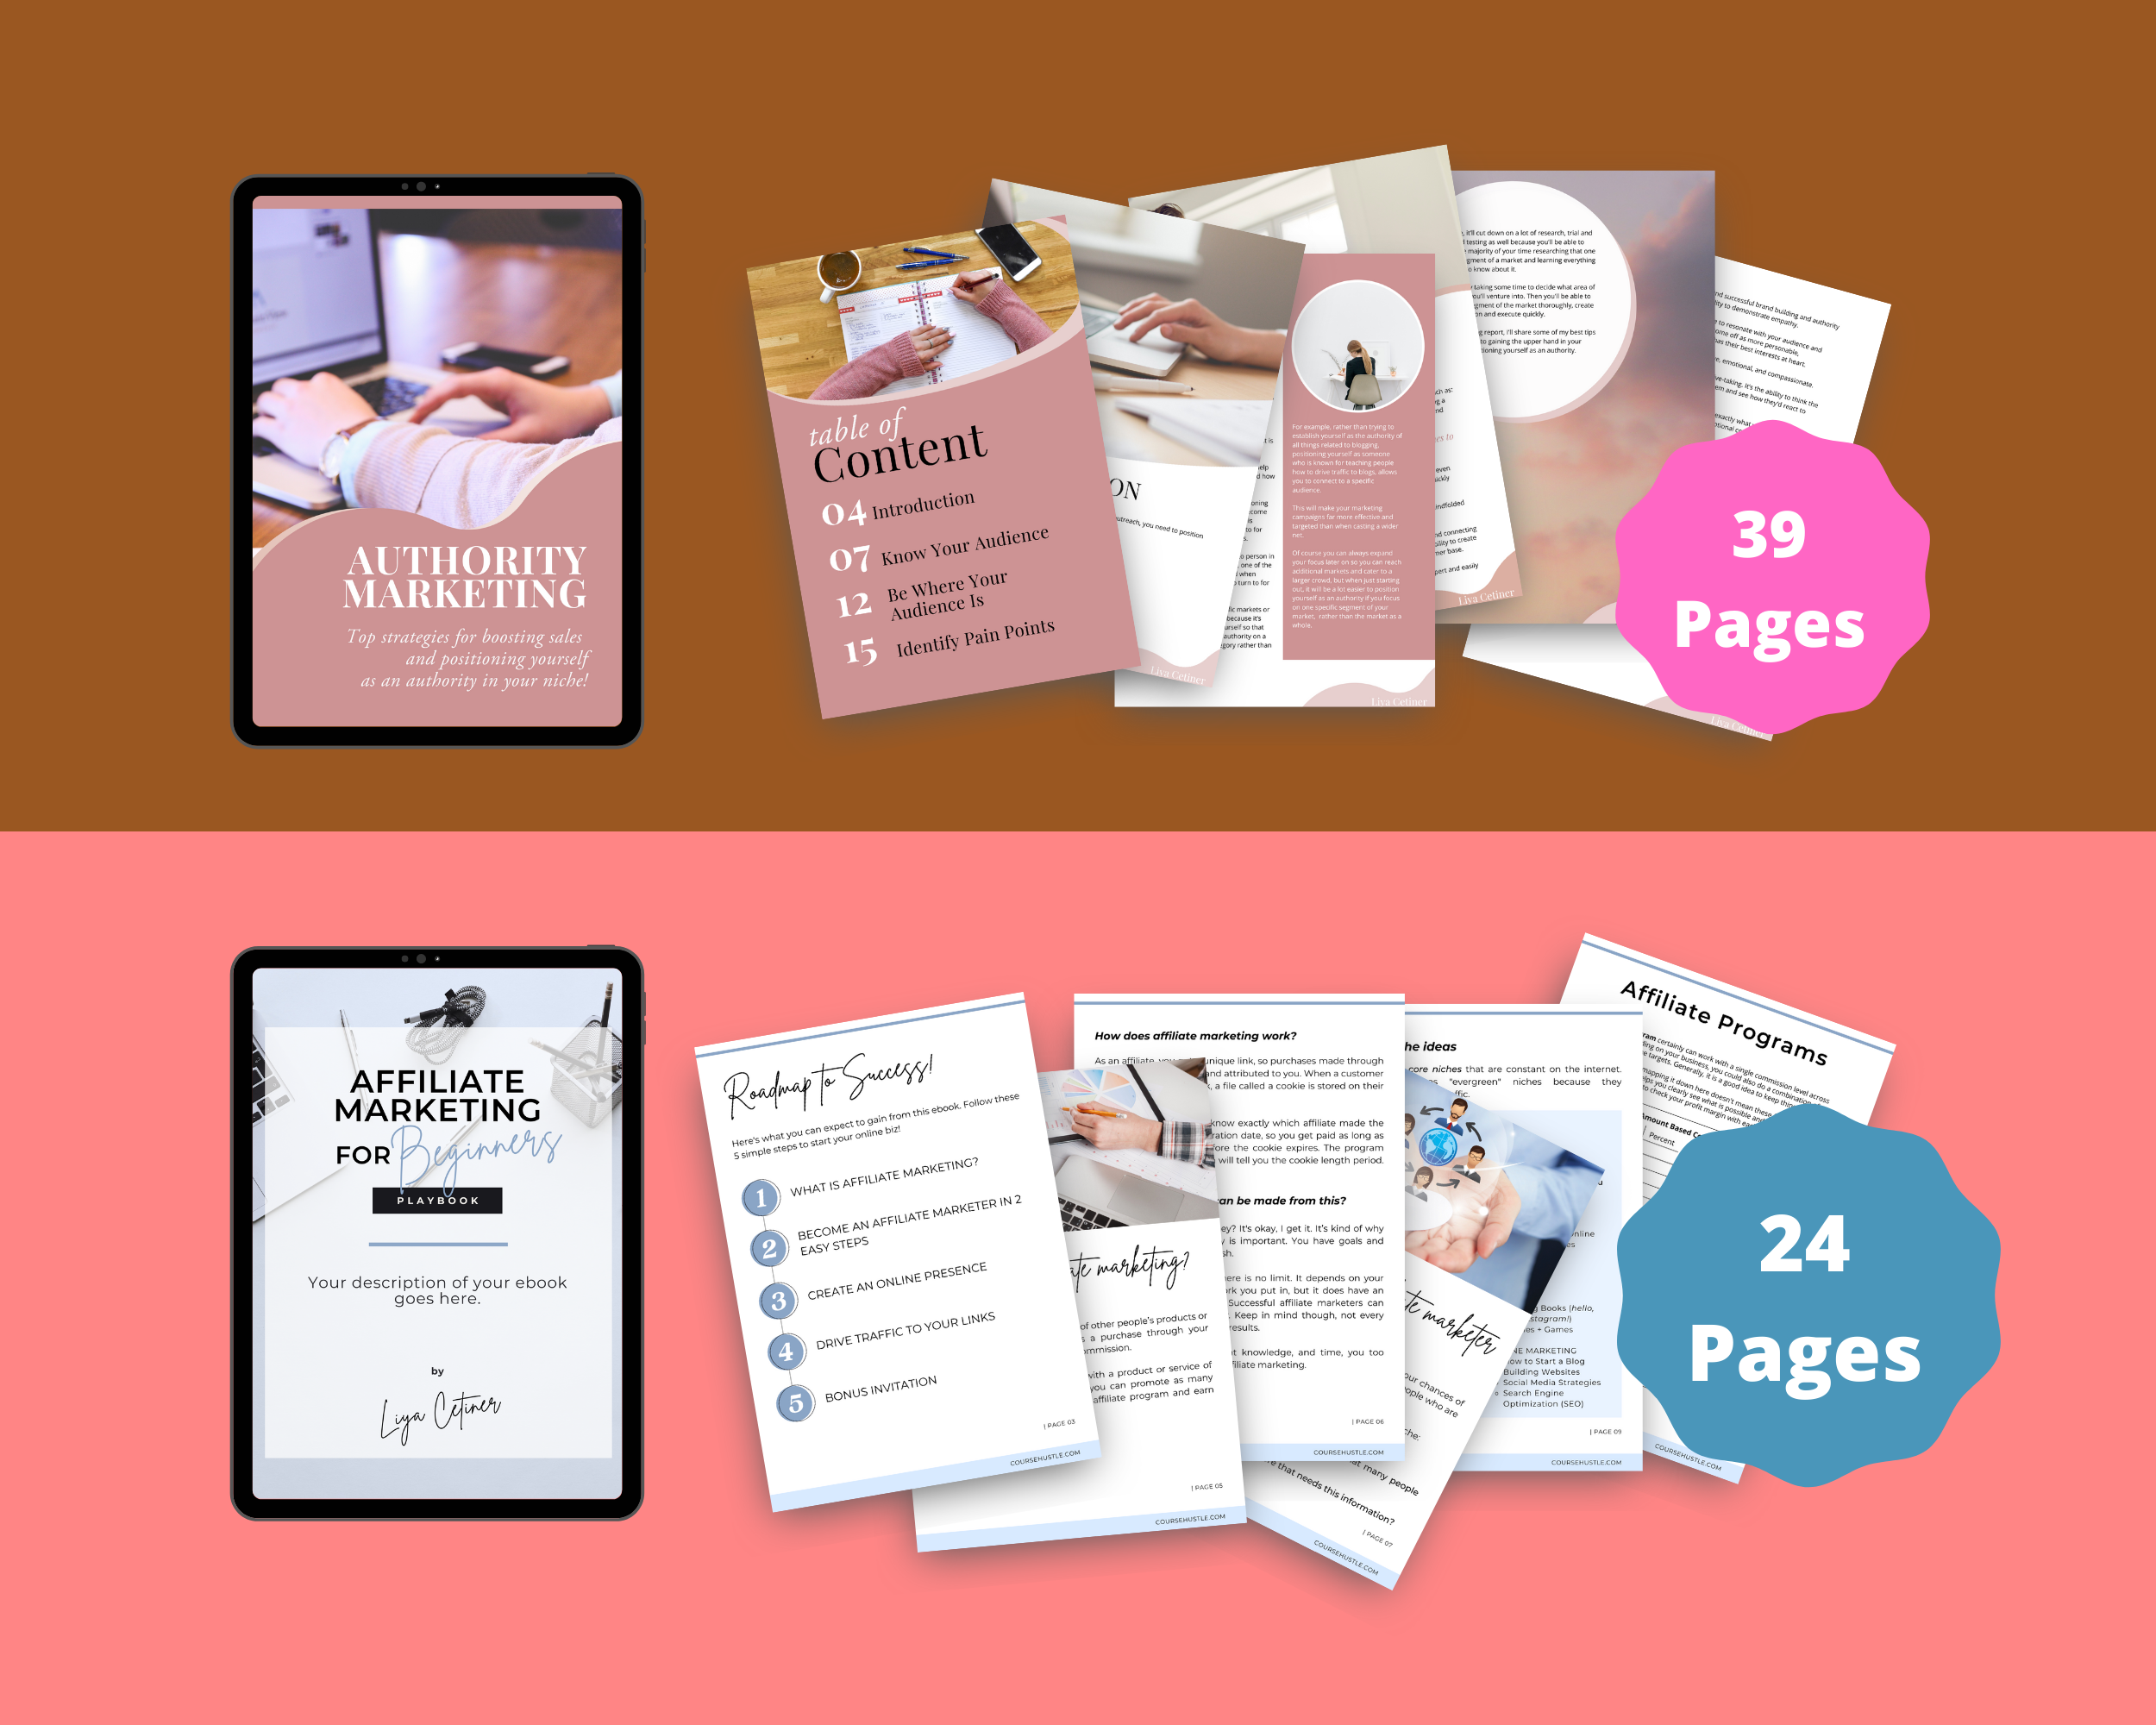 BUNDLE of 11 Business Playbooks in Canva | Customizable | Editable | Commercial Use | Business Templates